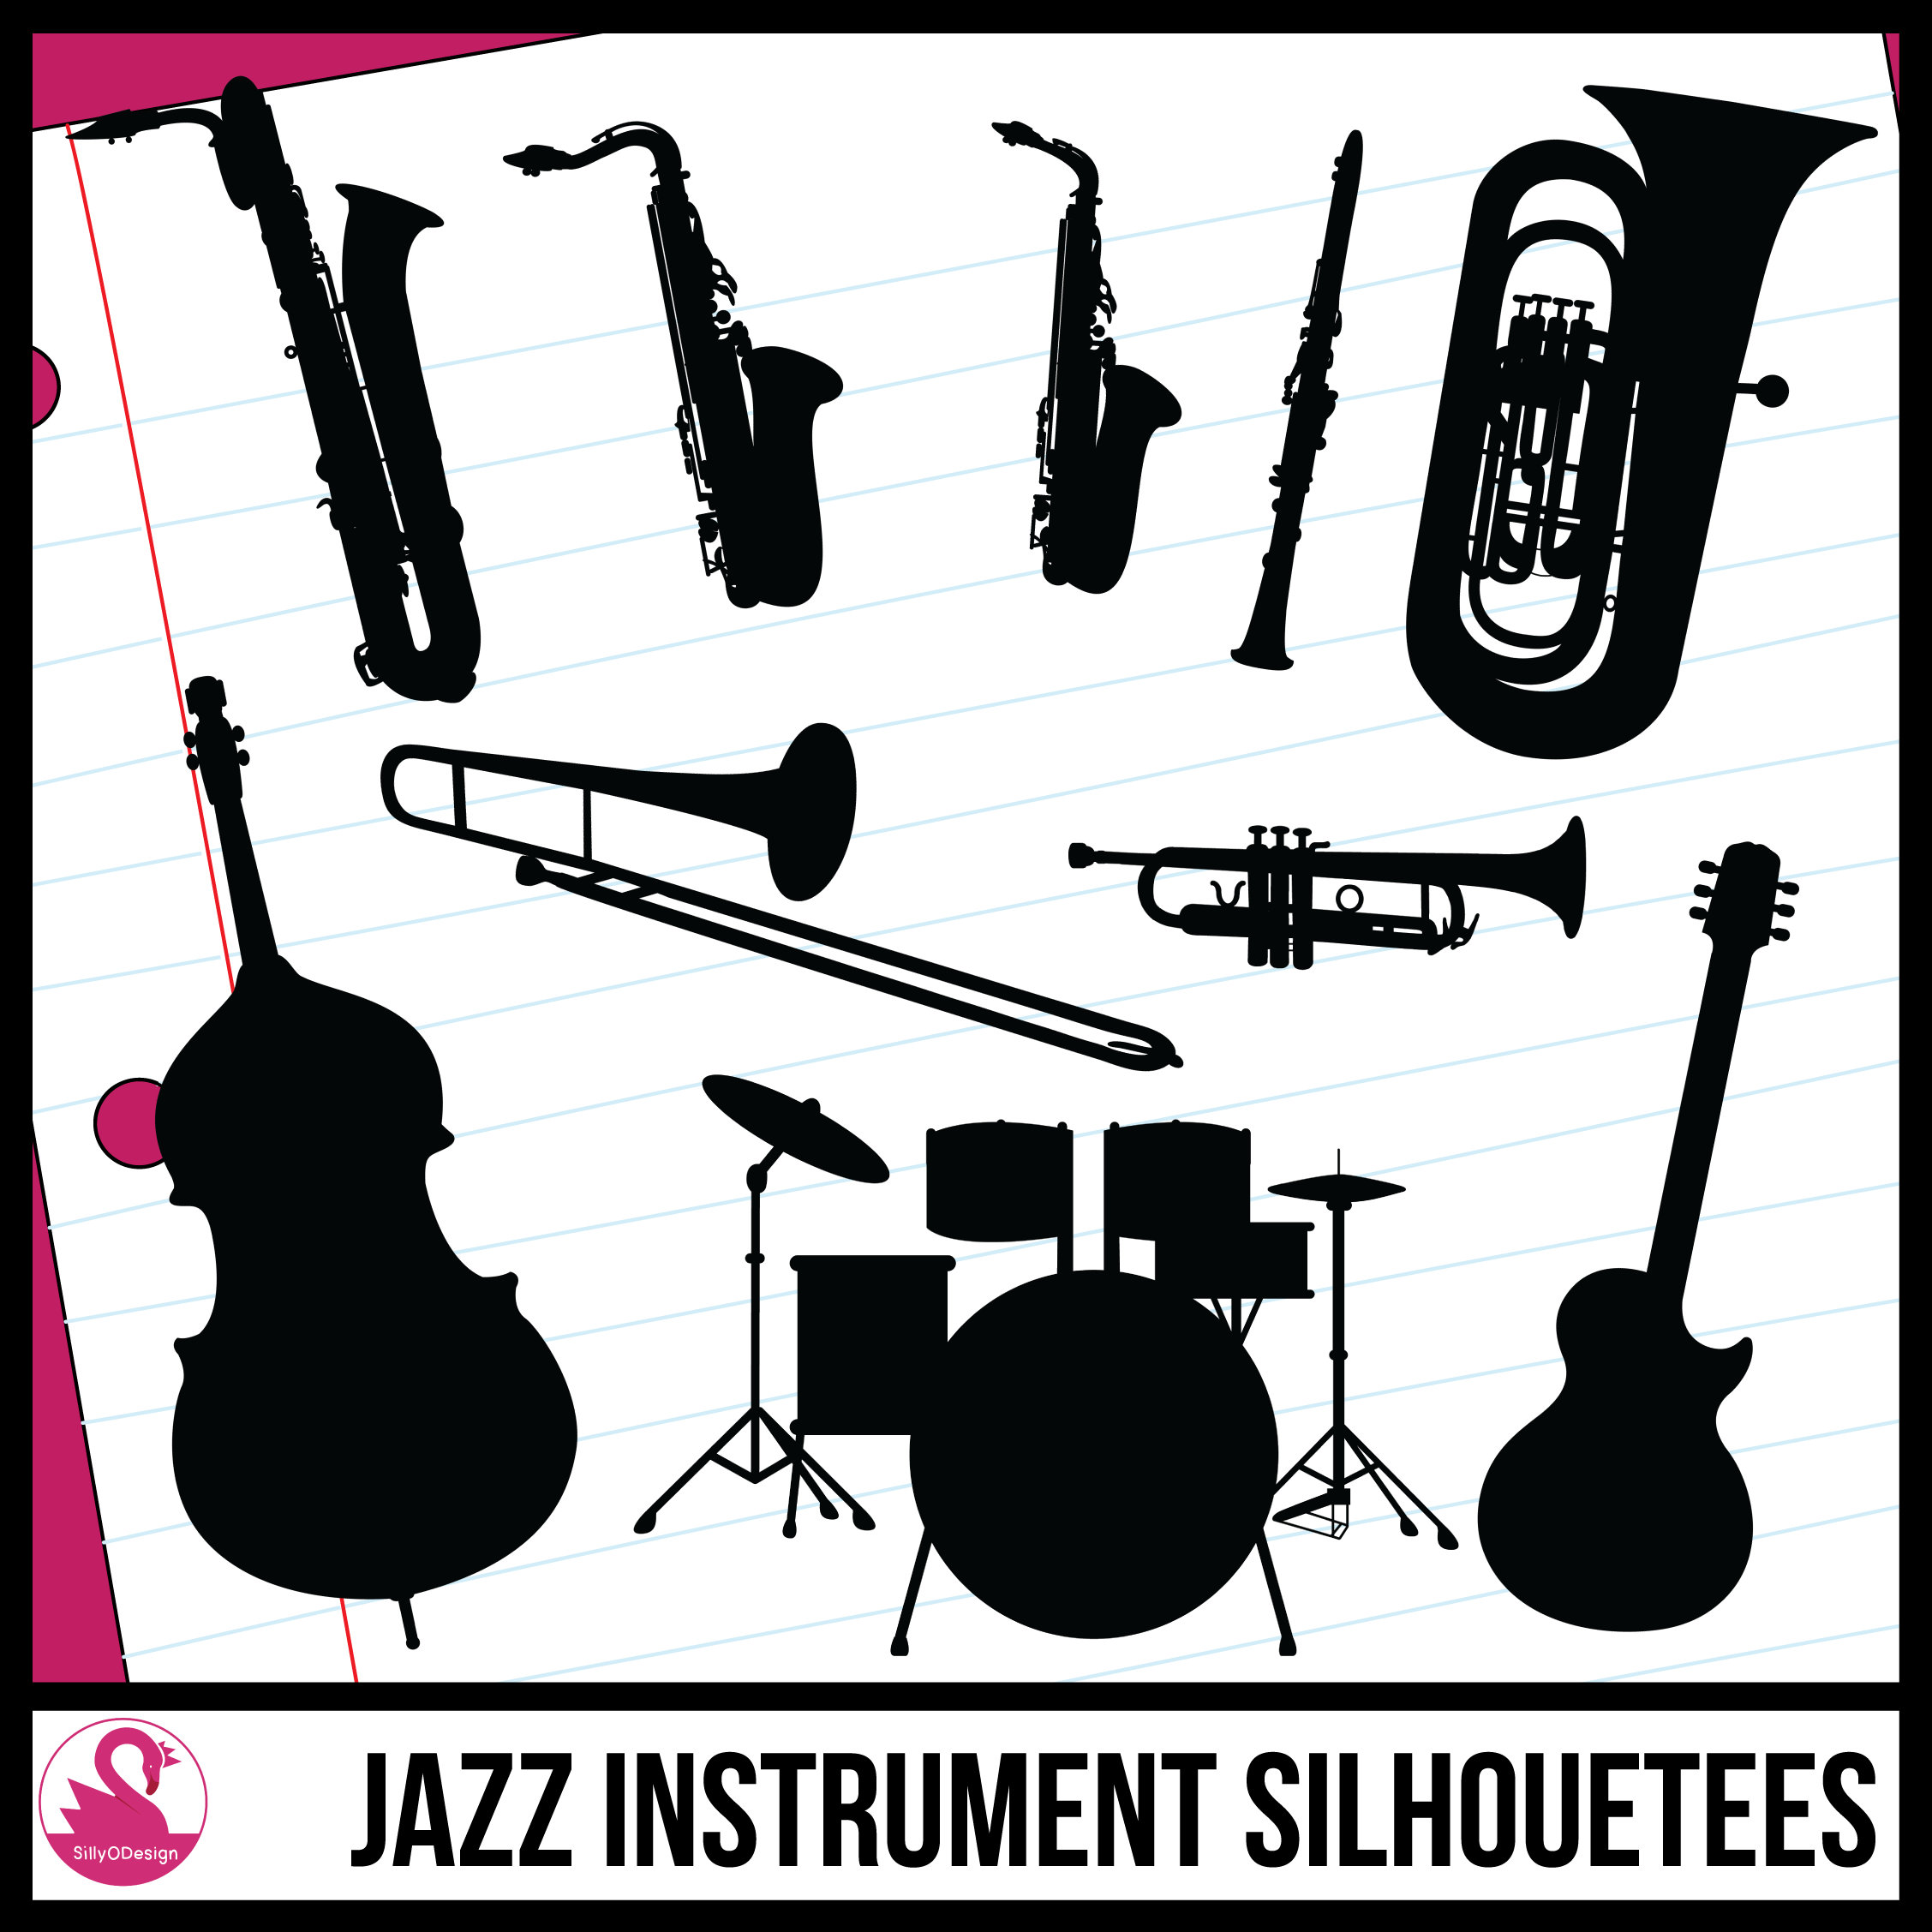 Musical Instruments Jazz Band Instrument Silhouettes/shadow - Etsy